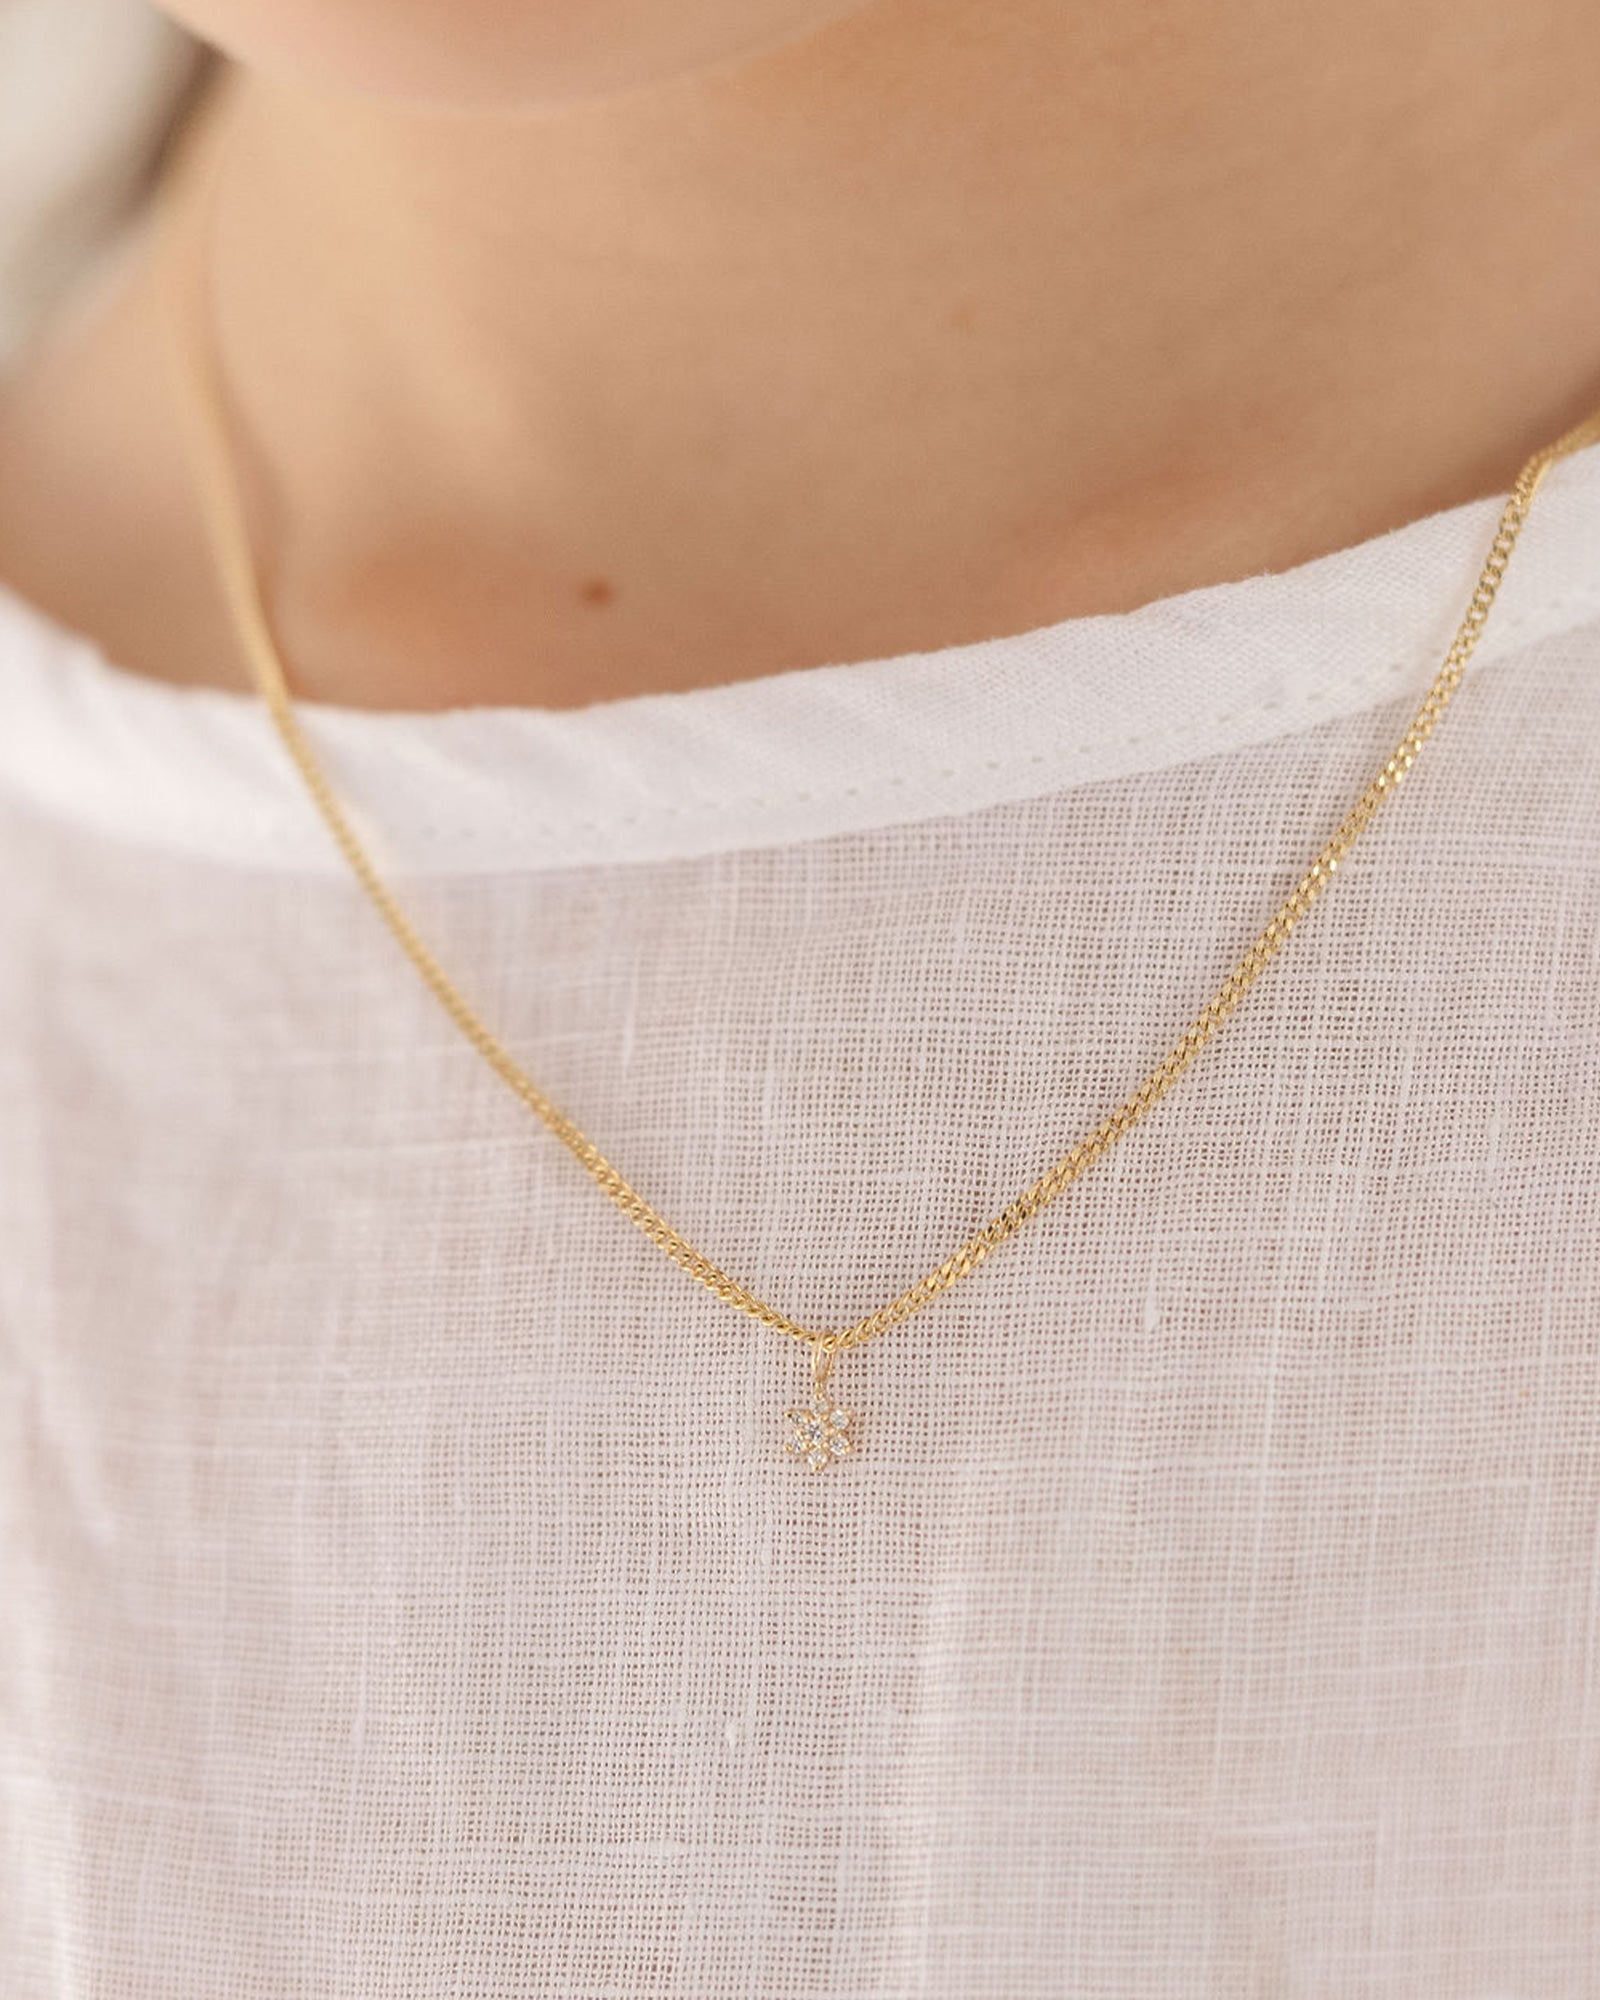 clos eup image of the Starburst Diamond necklace in yellow gold, being worn on a child model